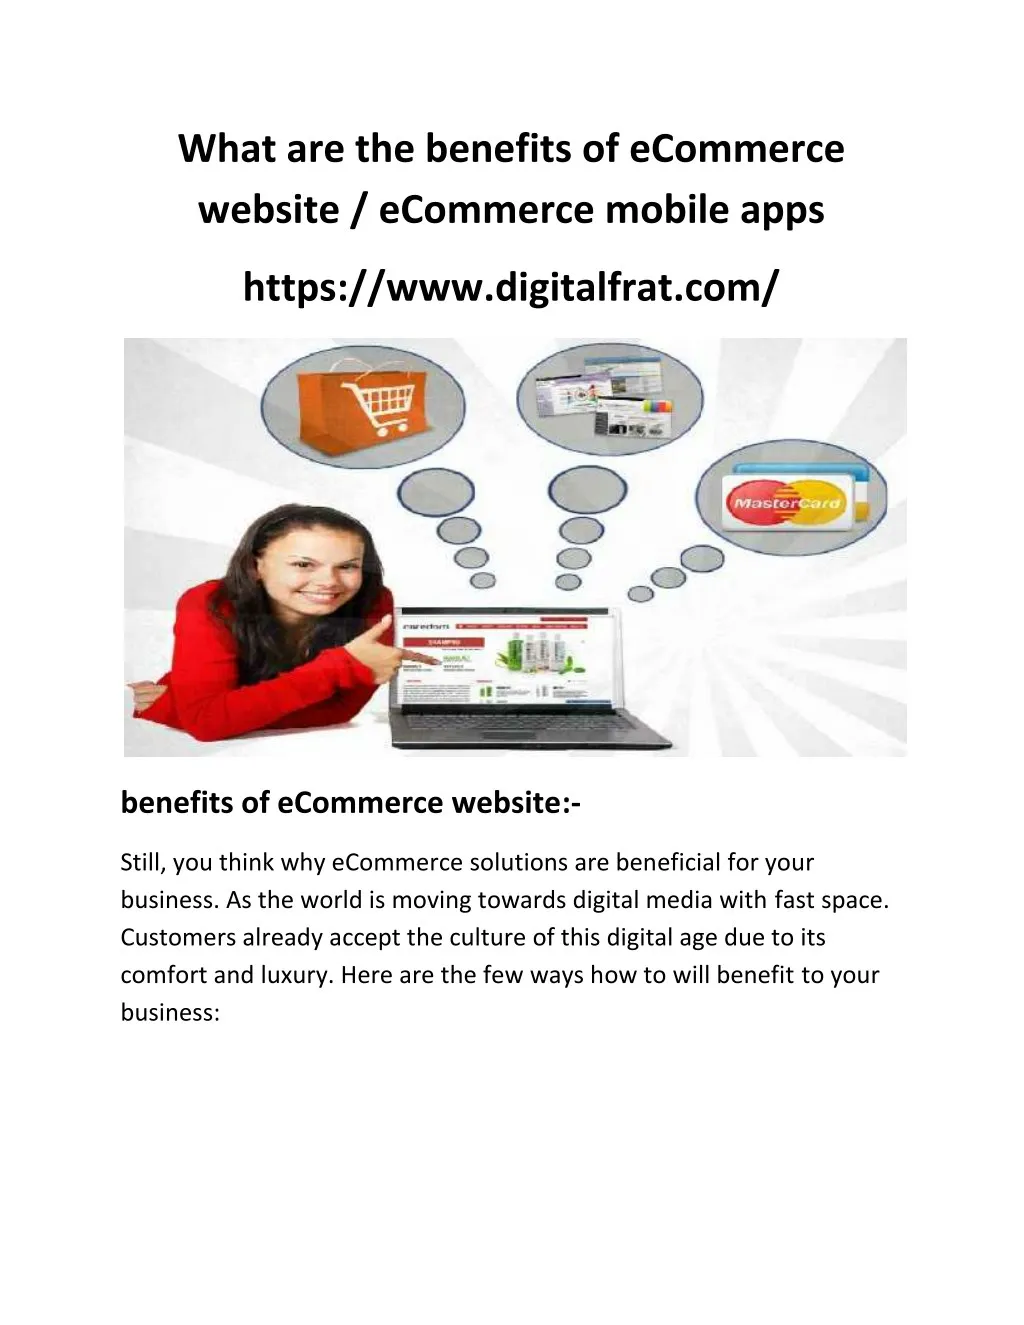 what are the benefits of ecommerce website